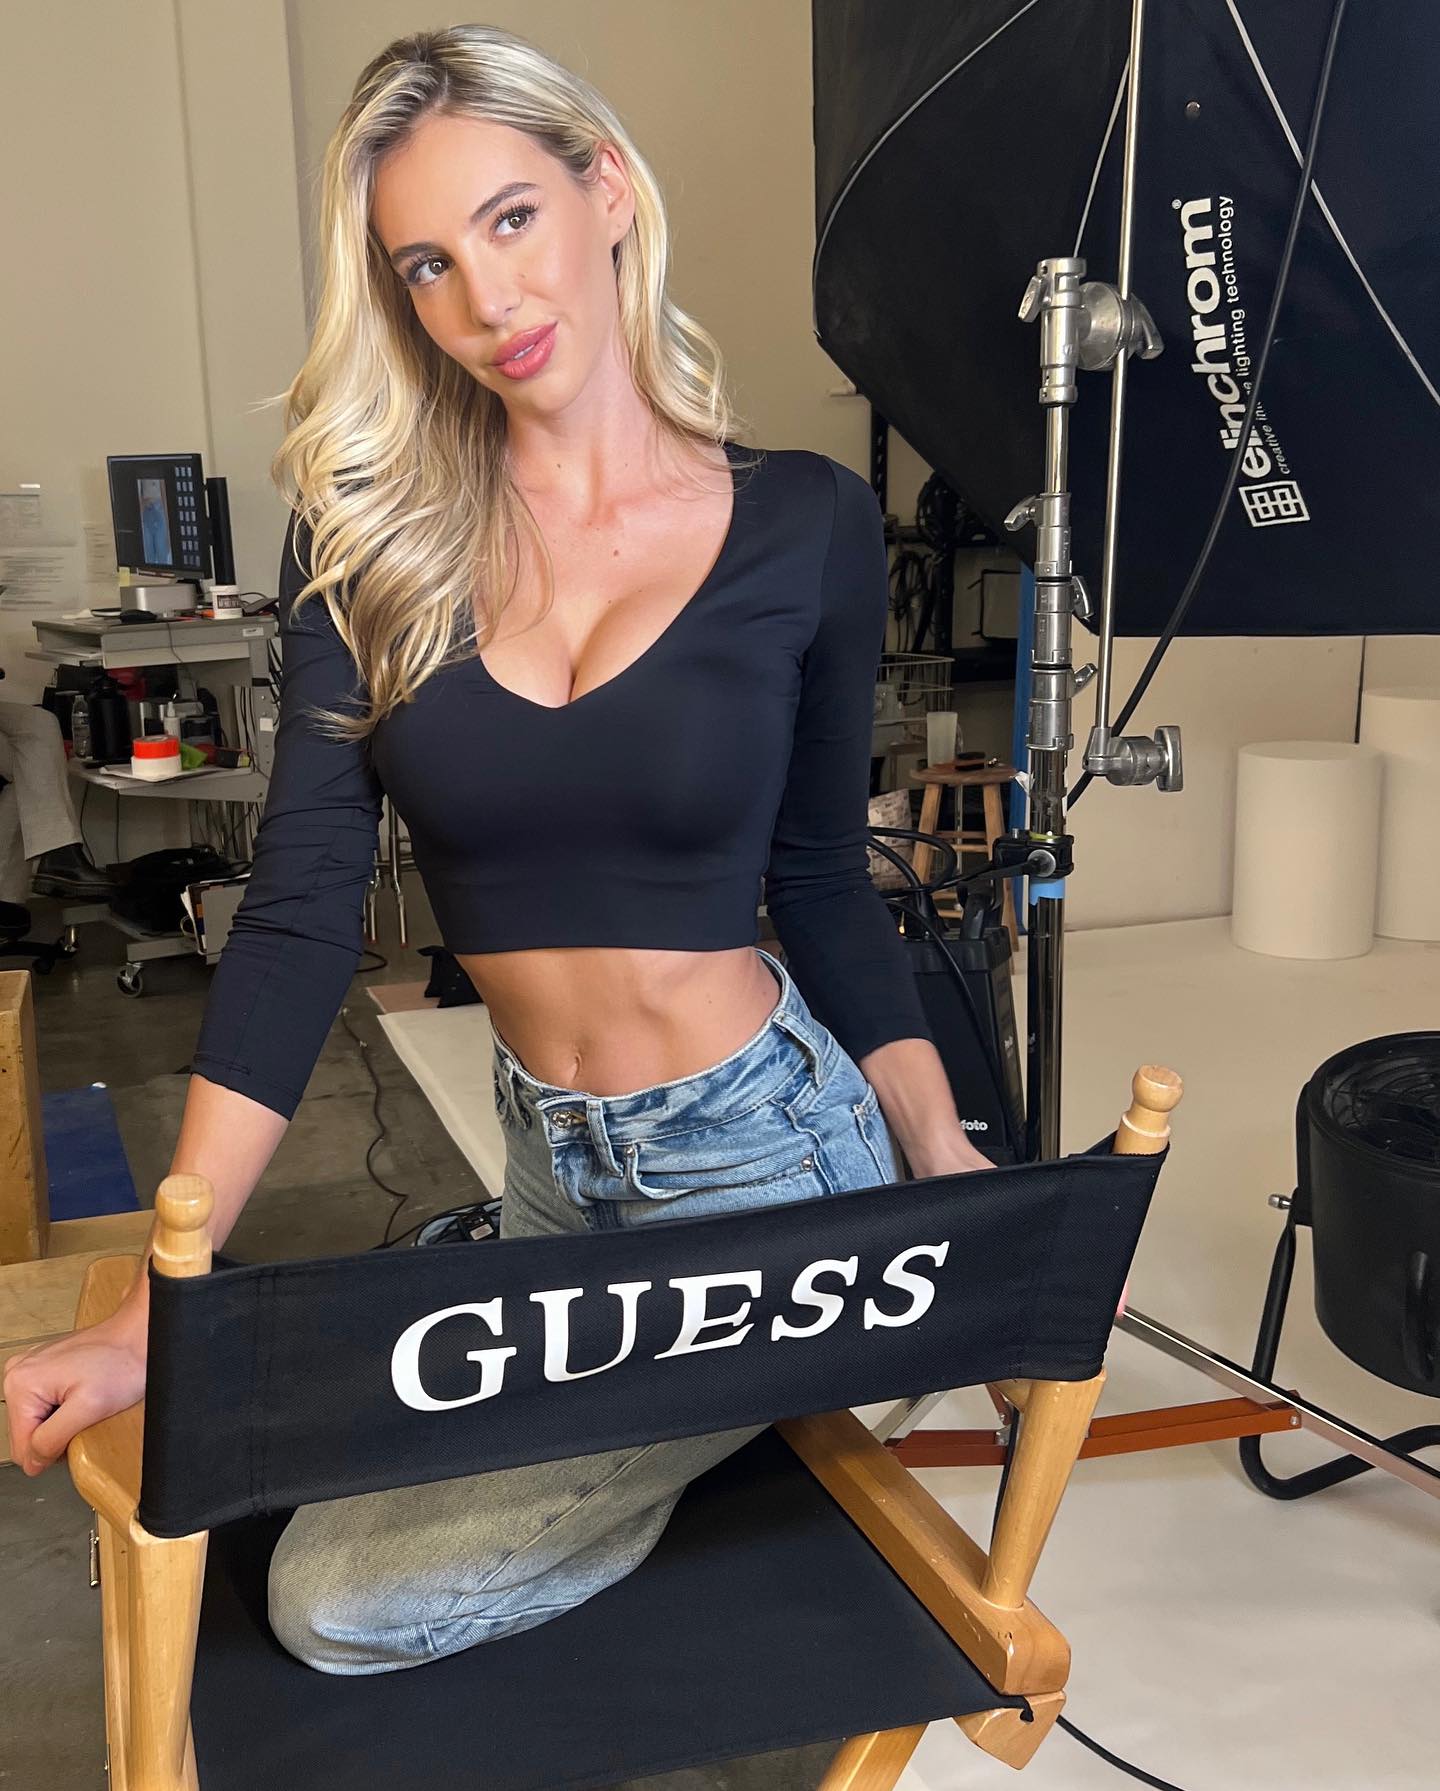 She recently modeled for Guess in Los Angeles